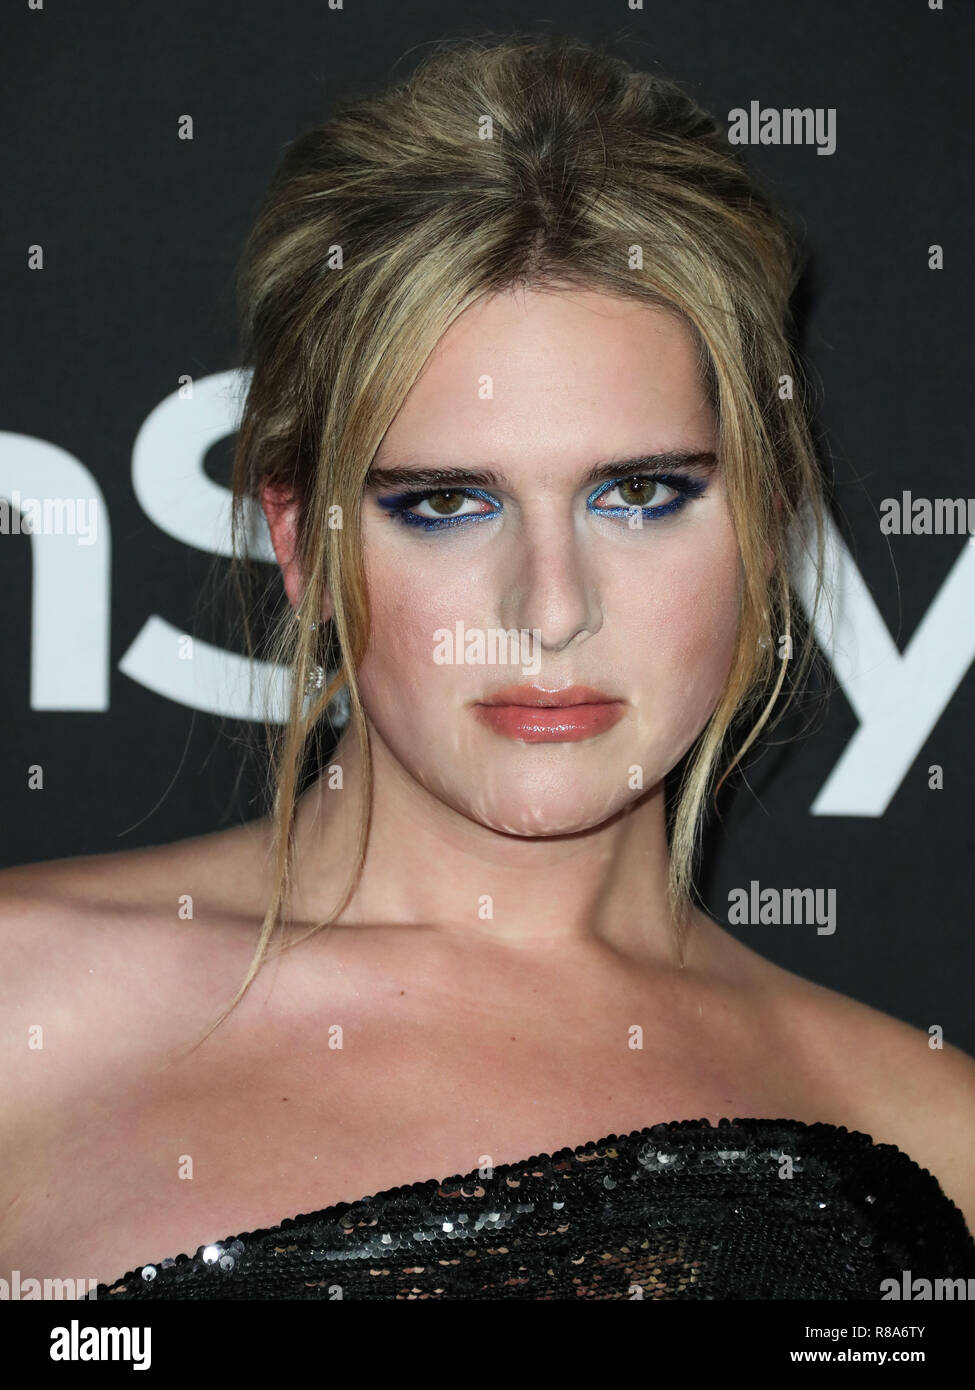 LOS ANGELES, CA, USA - OCTOBER 22: Hari Nef at the InStyle Awards 2018 held at the Getty Center on October 22, 2018 in Los Angeles, California, United States. (Photo by Xavier Collin/Image Press Agency) Stock Photo